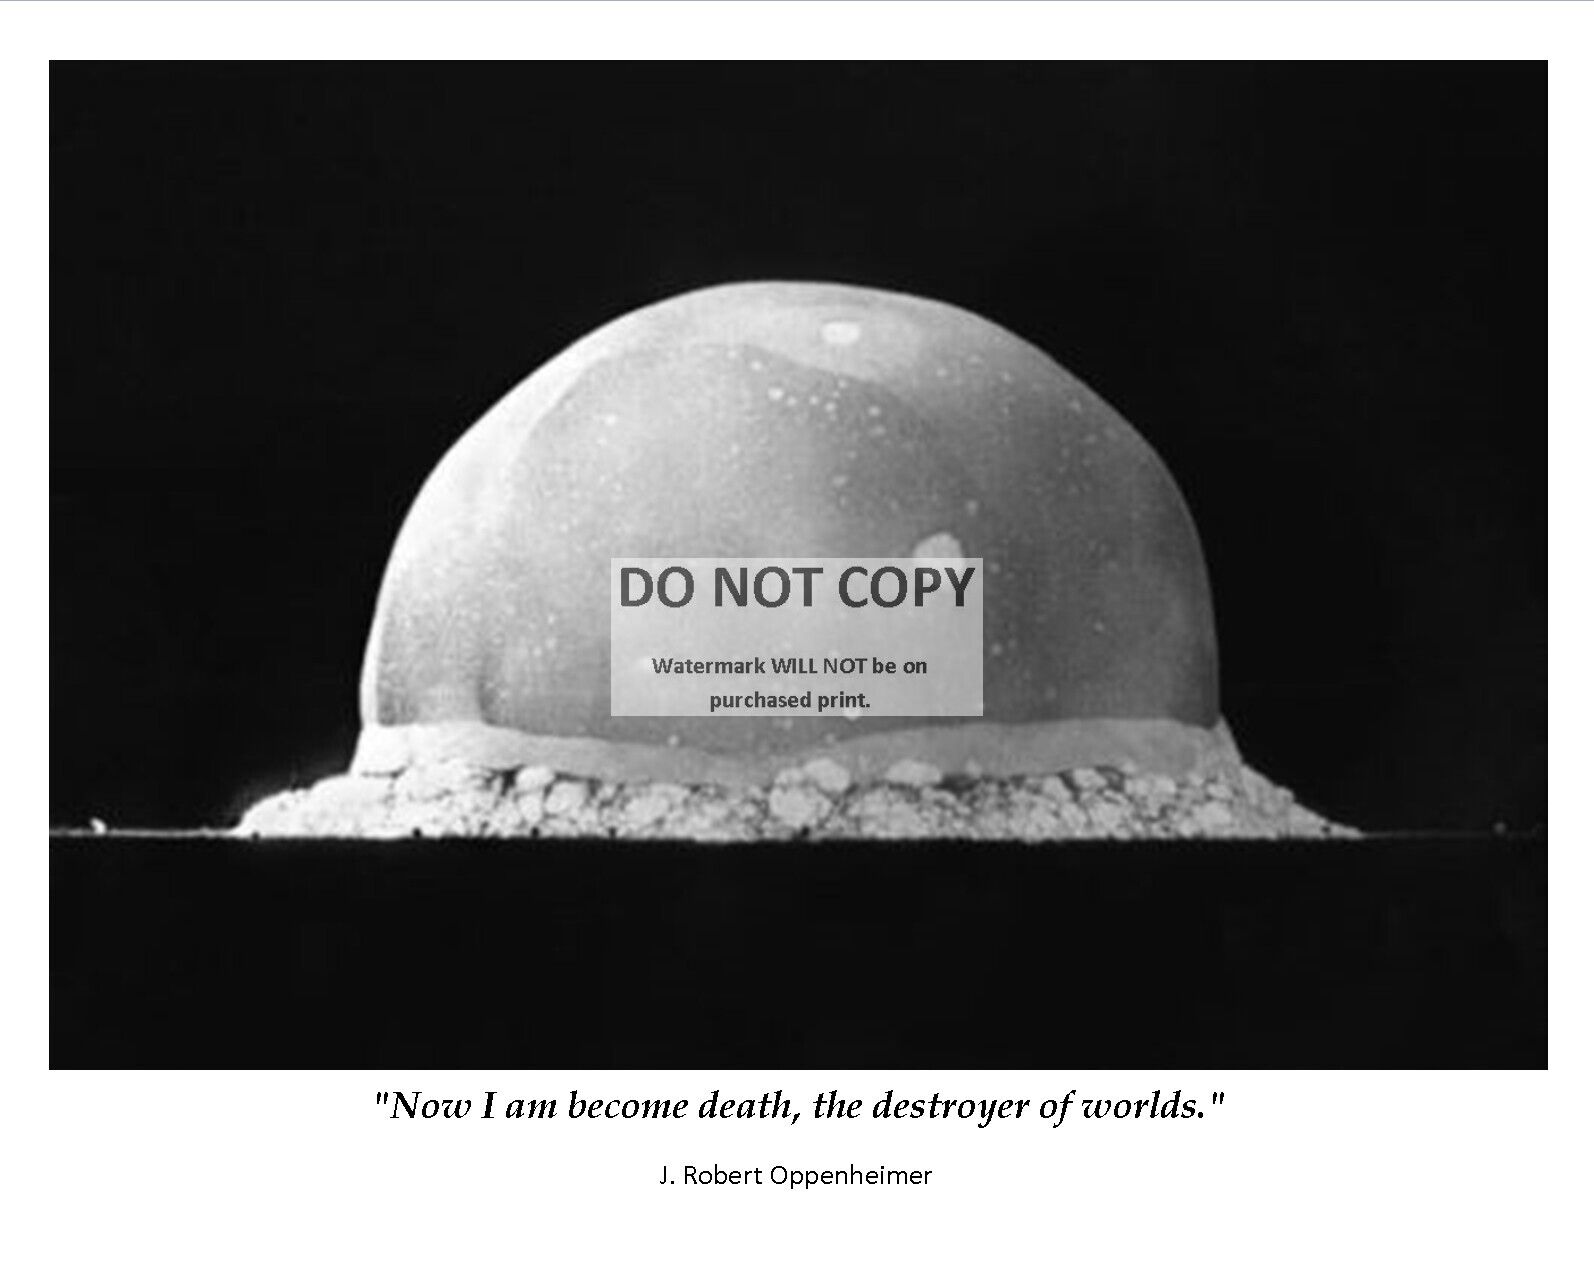 ROBERT OPPENHEIMER FAMOUS QUOTE FROM LEGENDARY PHYSICIST - 8X10 PHOTO (PQ-010)